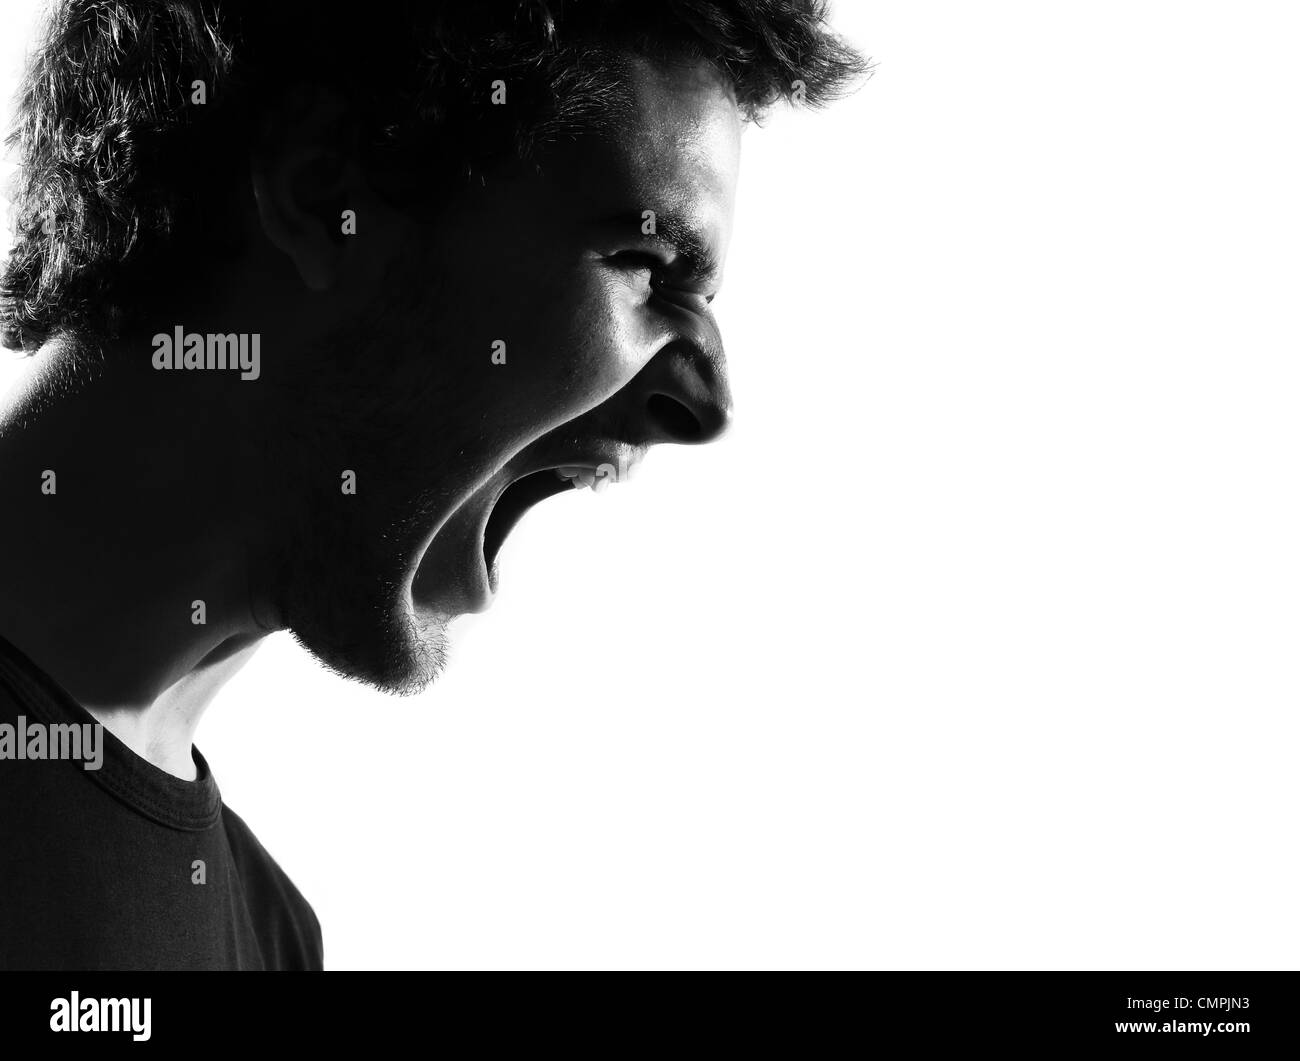 young man screaming angry portrait silhouette in studio isolated on white background Stock Photo